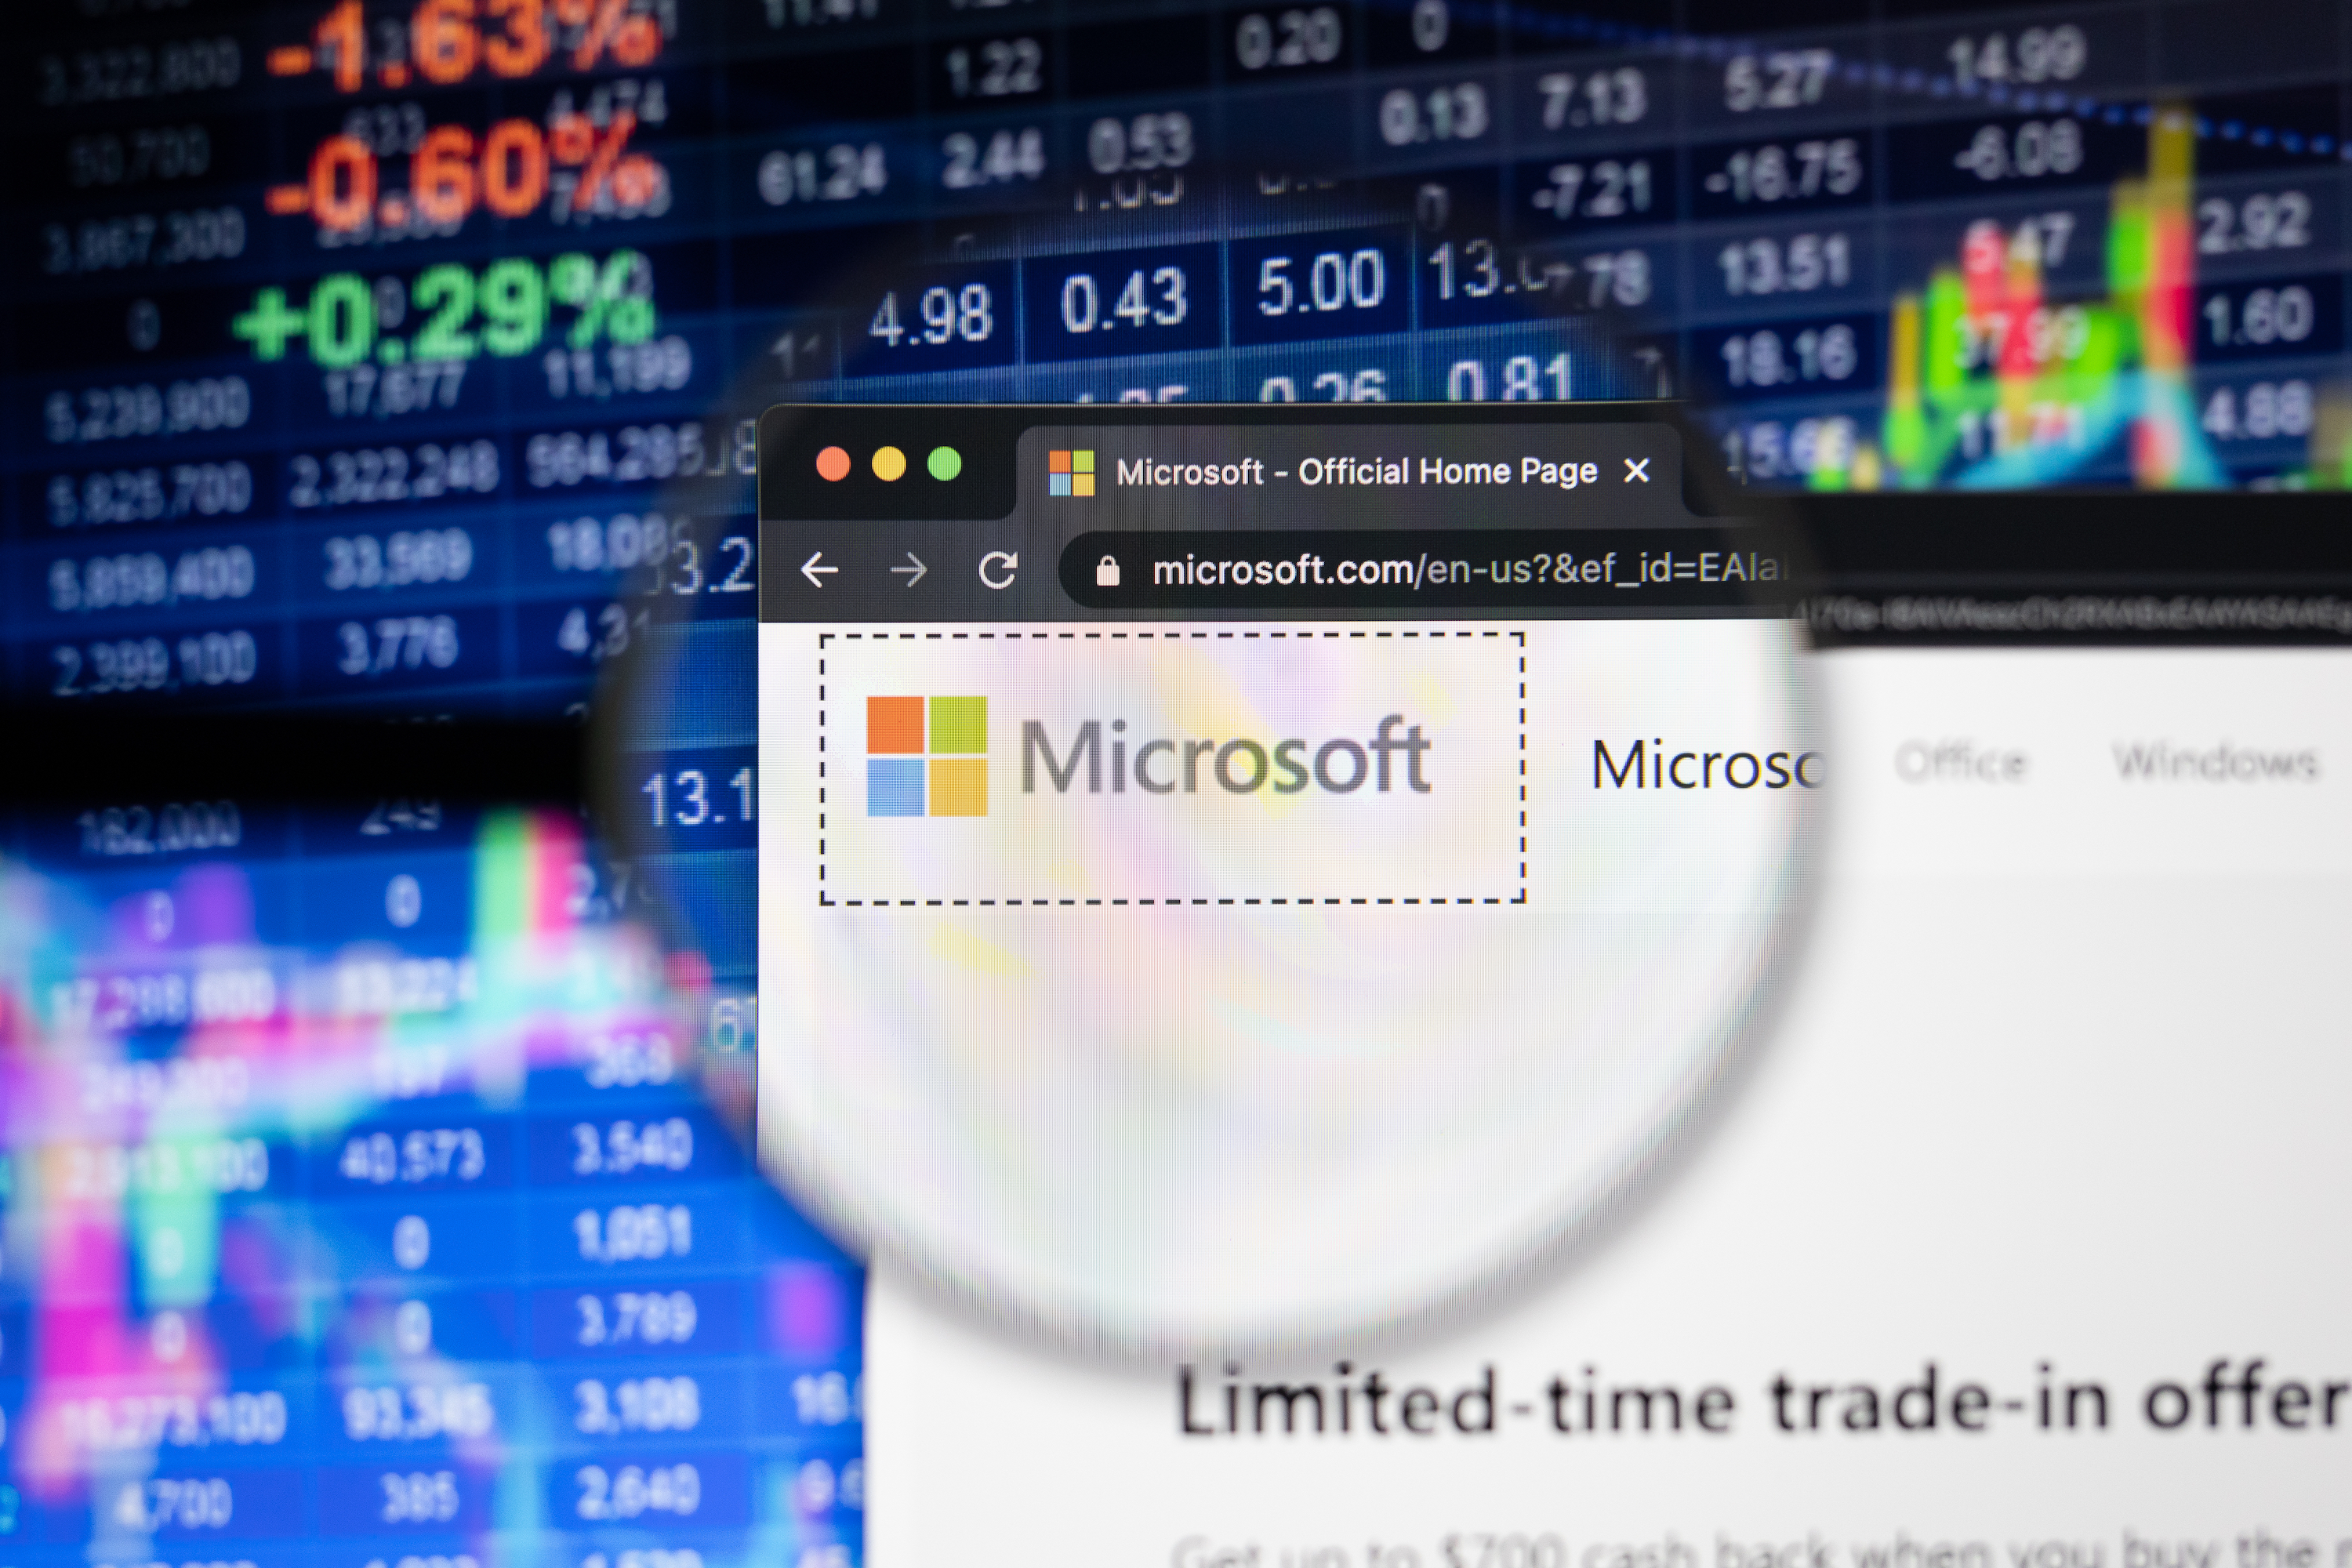 Microsoft Earnings Call Highlights Latest In AI For Search & Ads